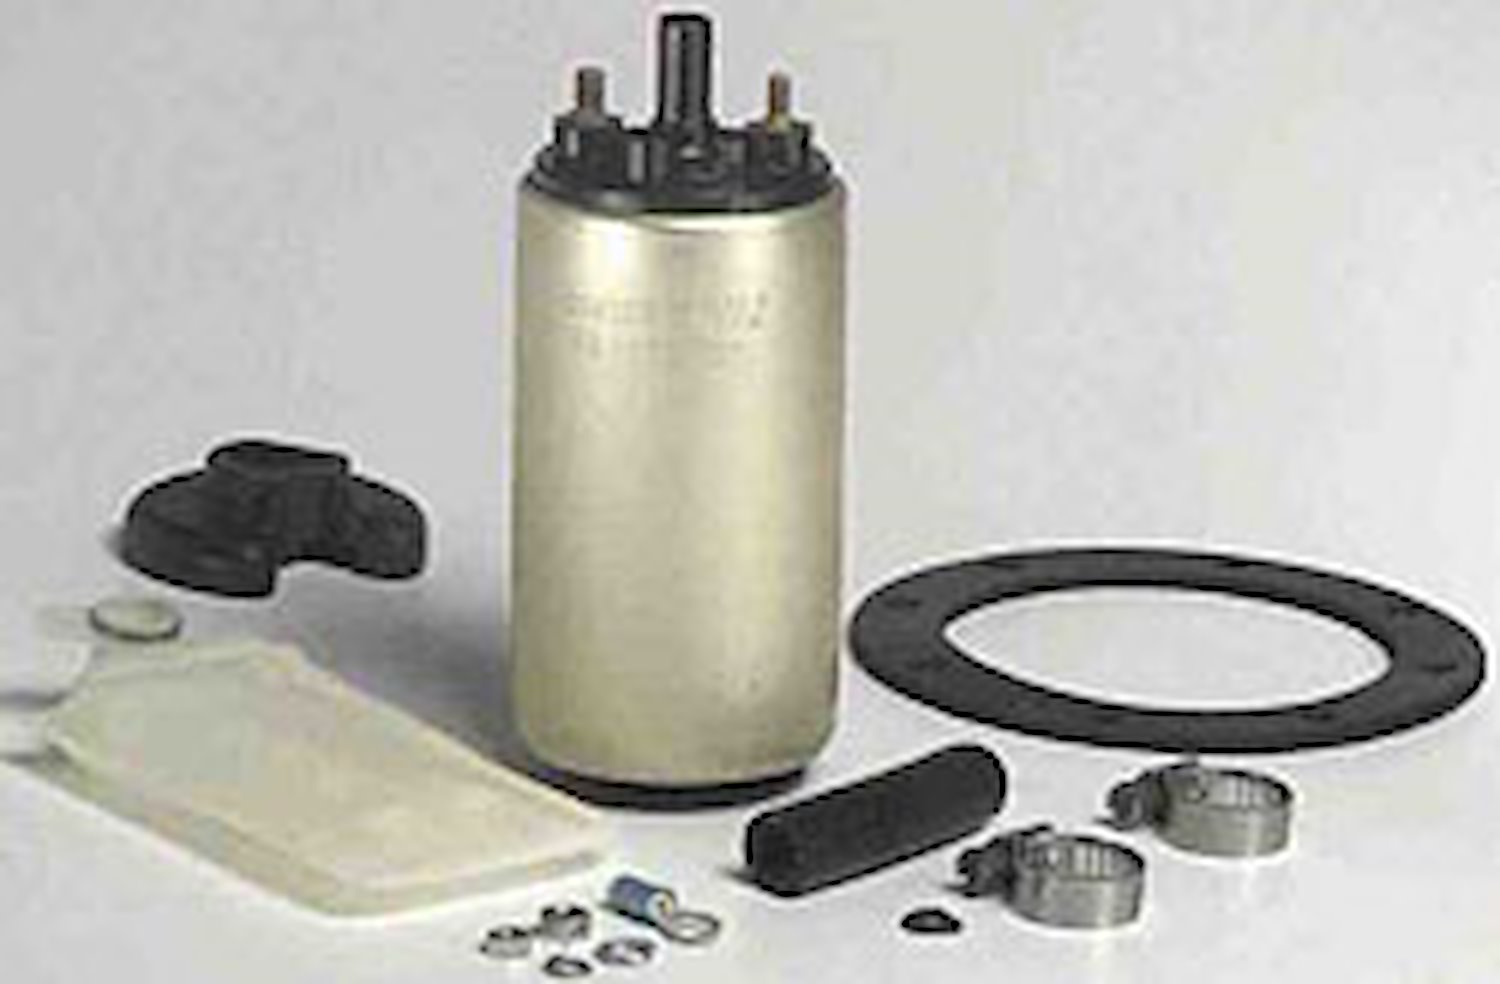 EFI In-Tank Electric Fuel Pump And Strainer Set for 1985-1990 Isuzu